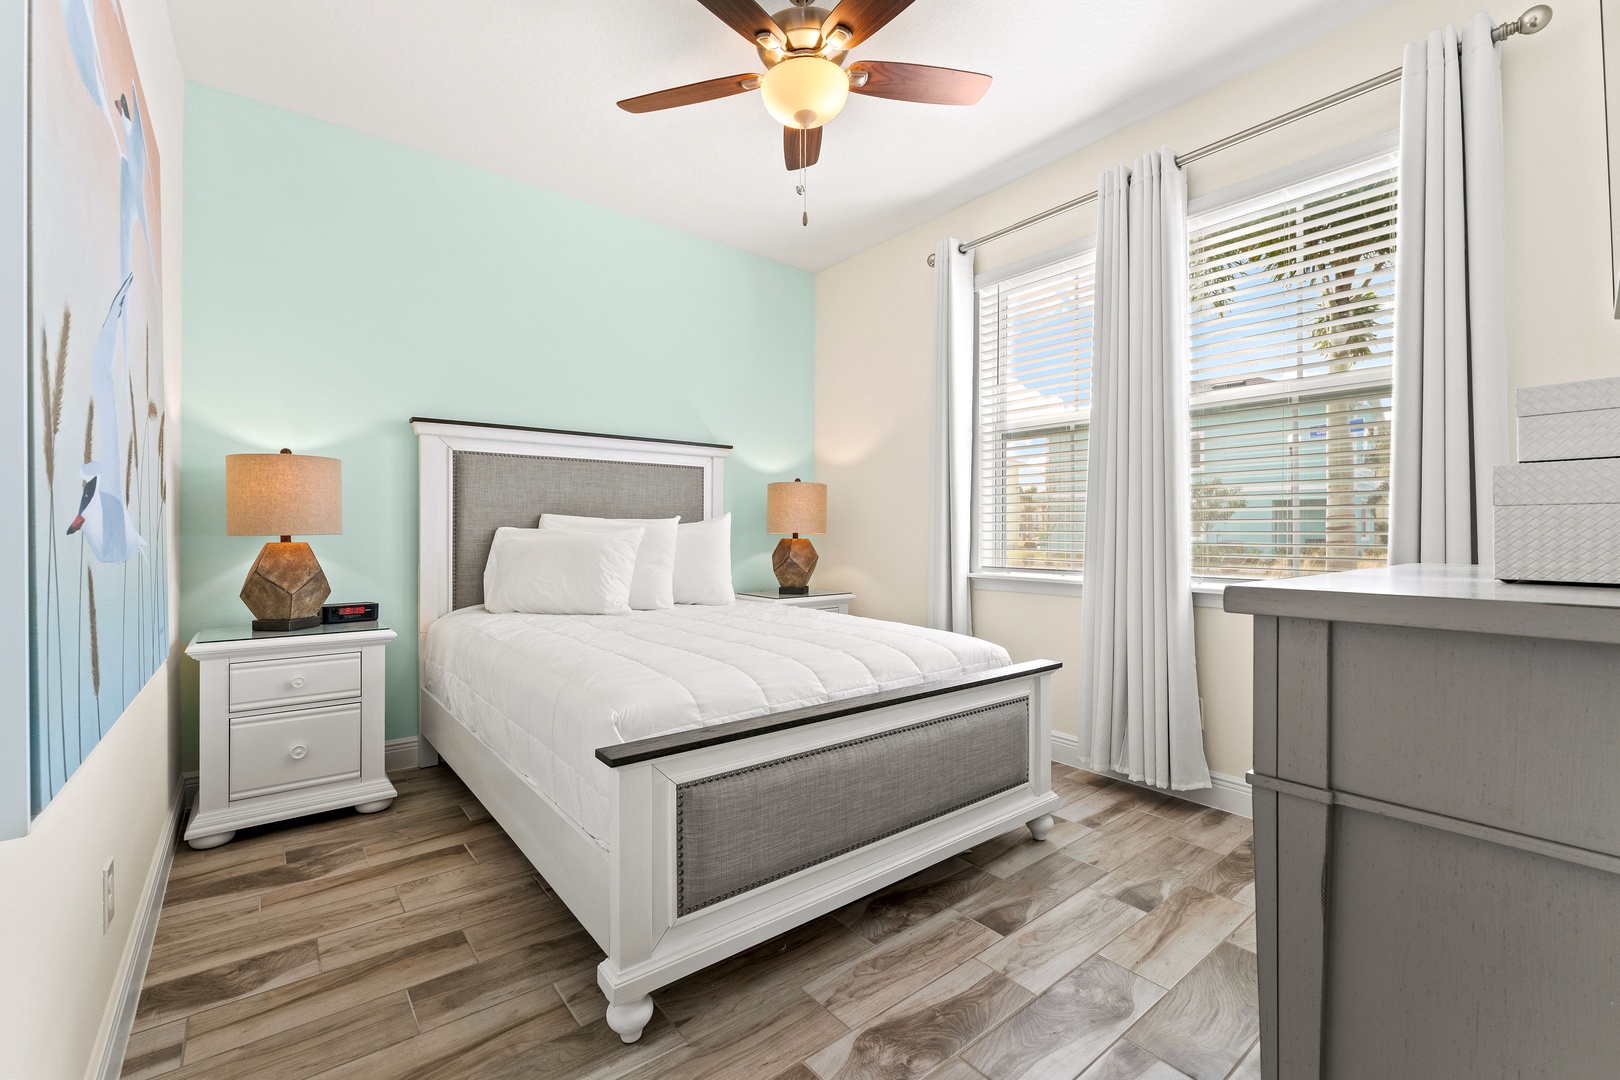 Sink into serenity in the first bedroom, with a queen bed & Smart TV